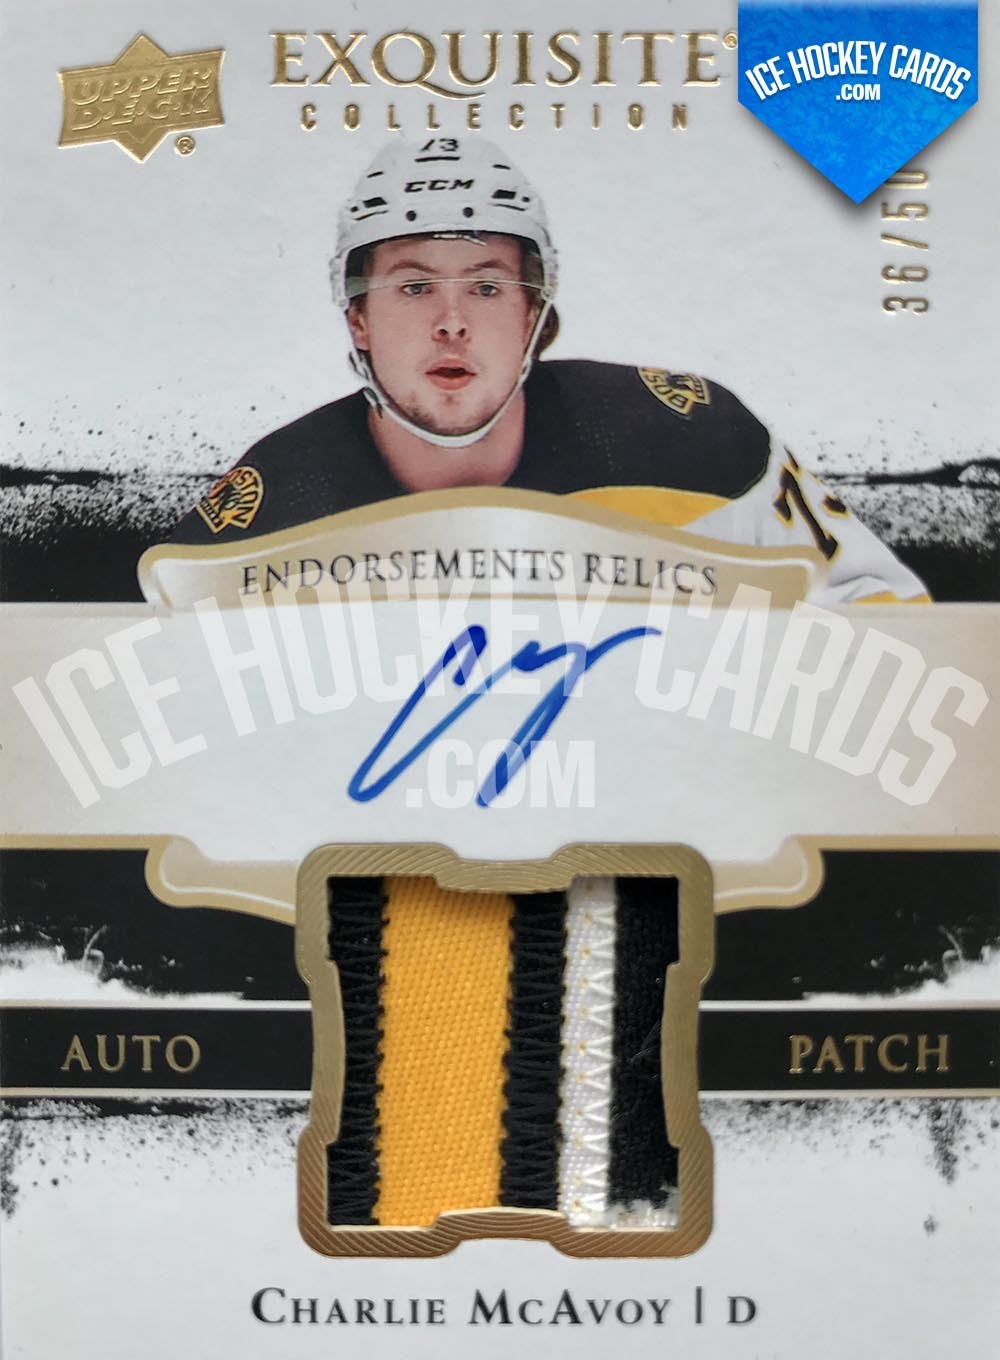 Upper Deck - Exquisite Collection 2017-18 - Charlie McAvoy Endorsements Relics Auto Patch Card # to 50